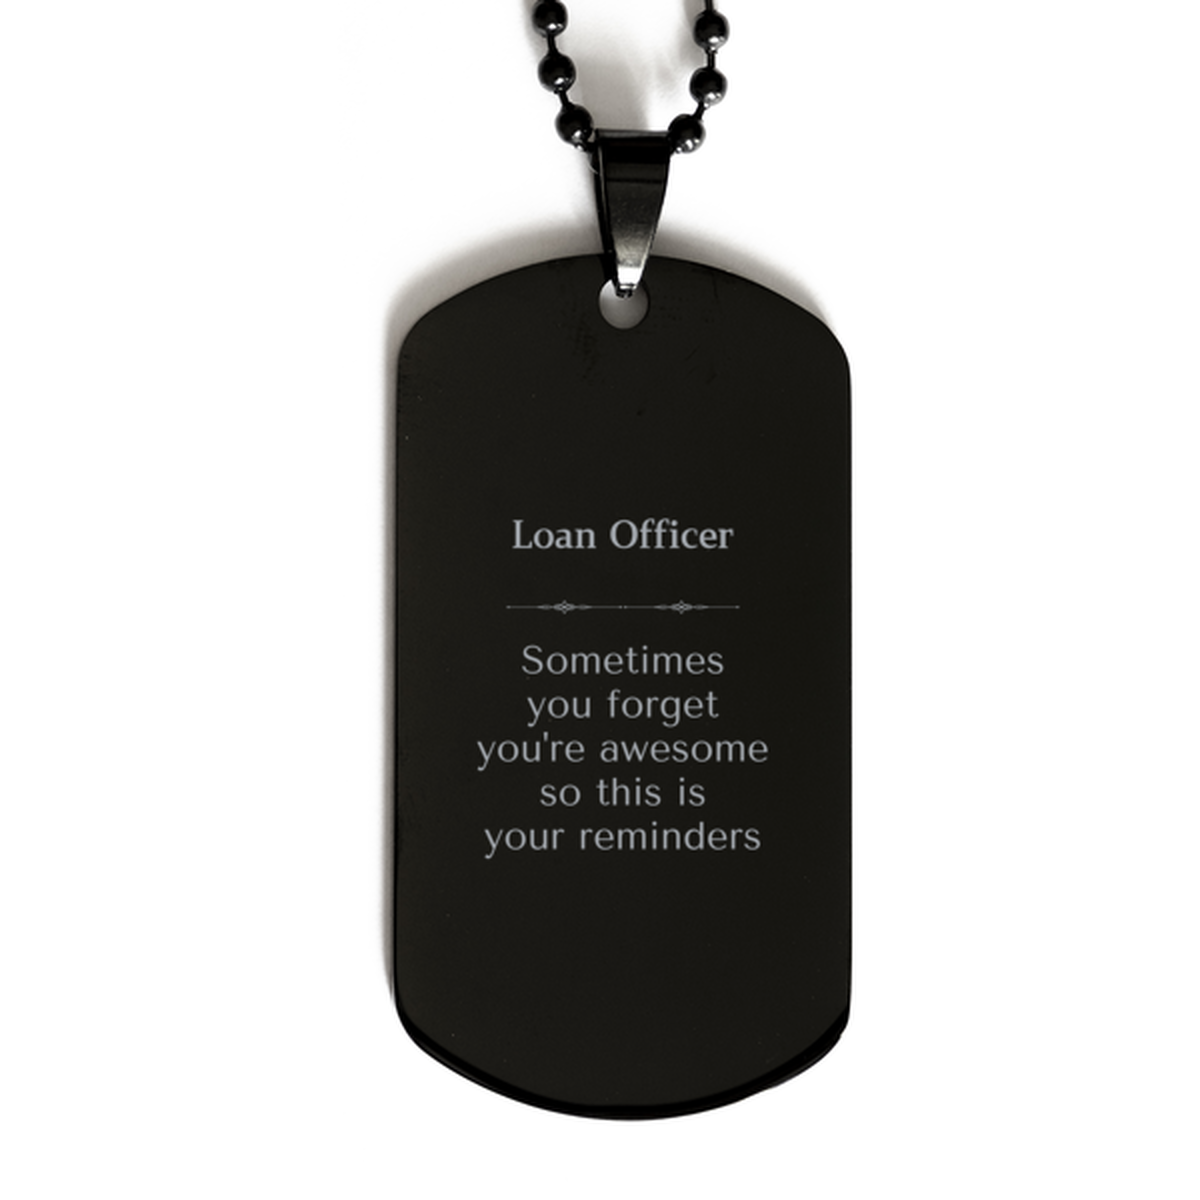 Sentimental Loan Officer Black Dog Tag, Loan Officer Sometimes you forget you're awesome so this is your reminders, Graduation Christmas Birthday Gifts for Loan Officer, Men, Women, Coworkers